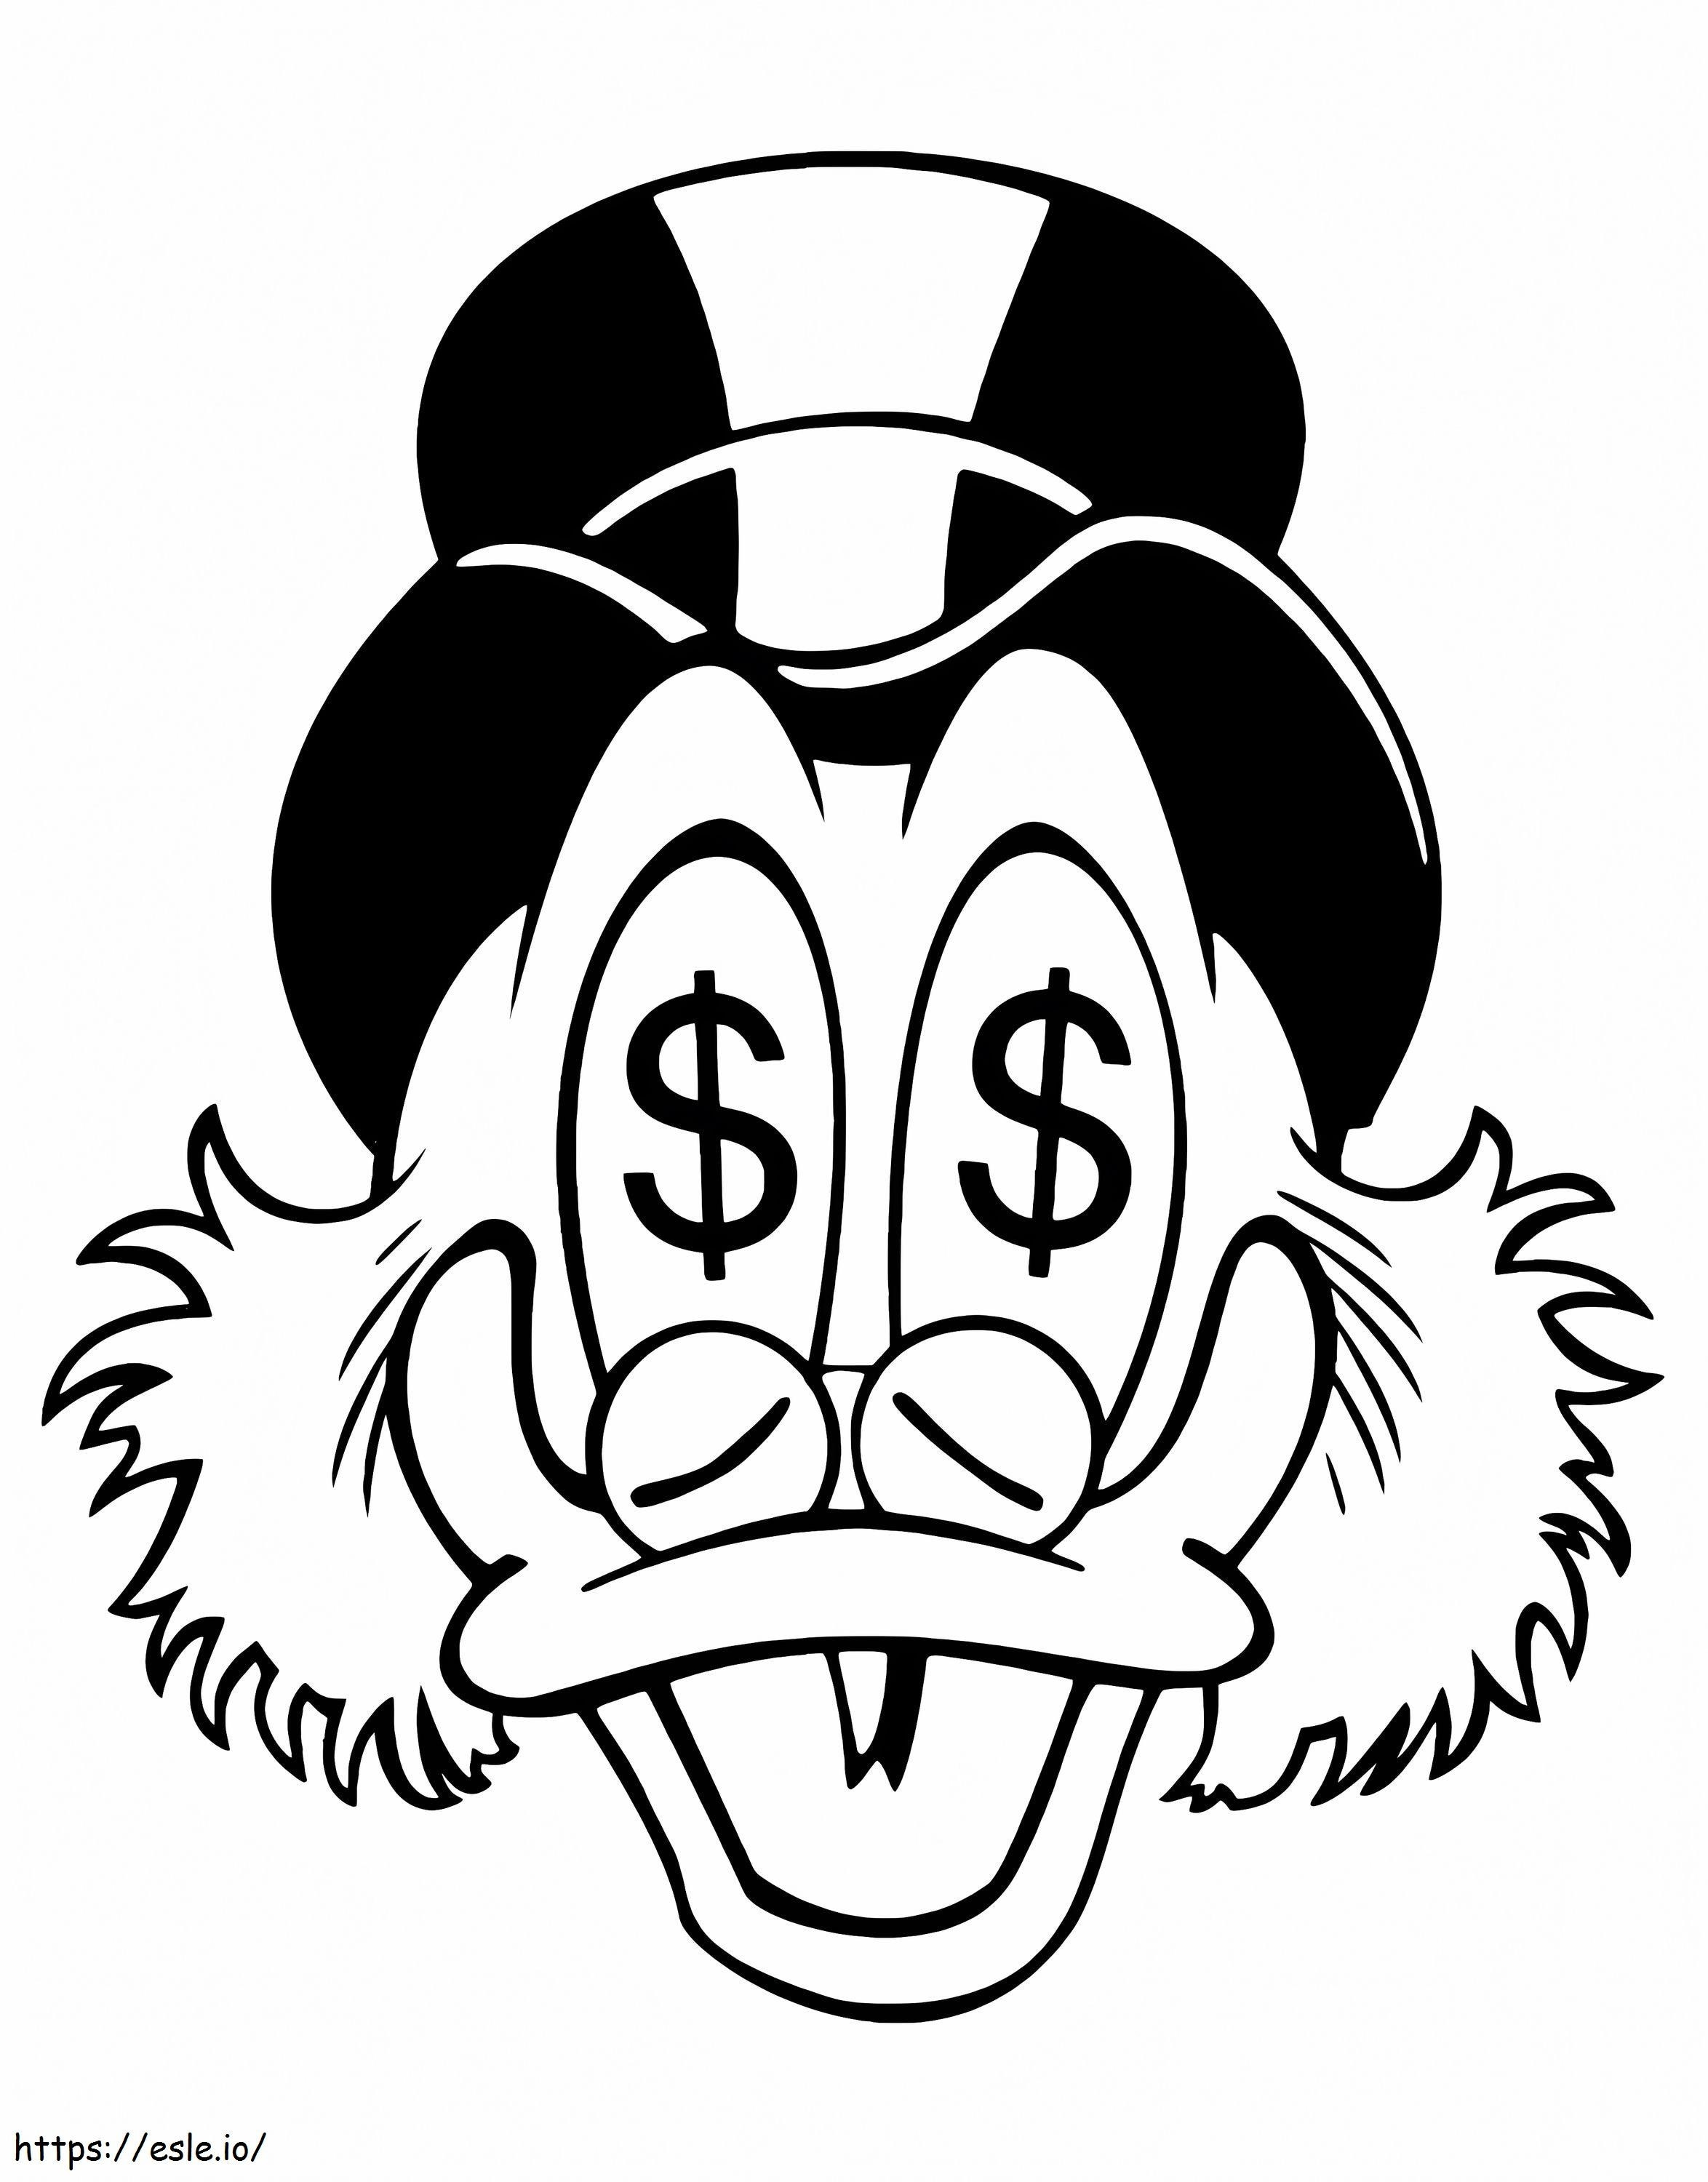 Scrooge McDuck Is Fun coloring page